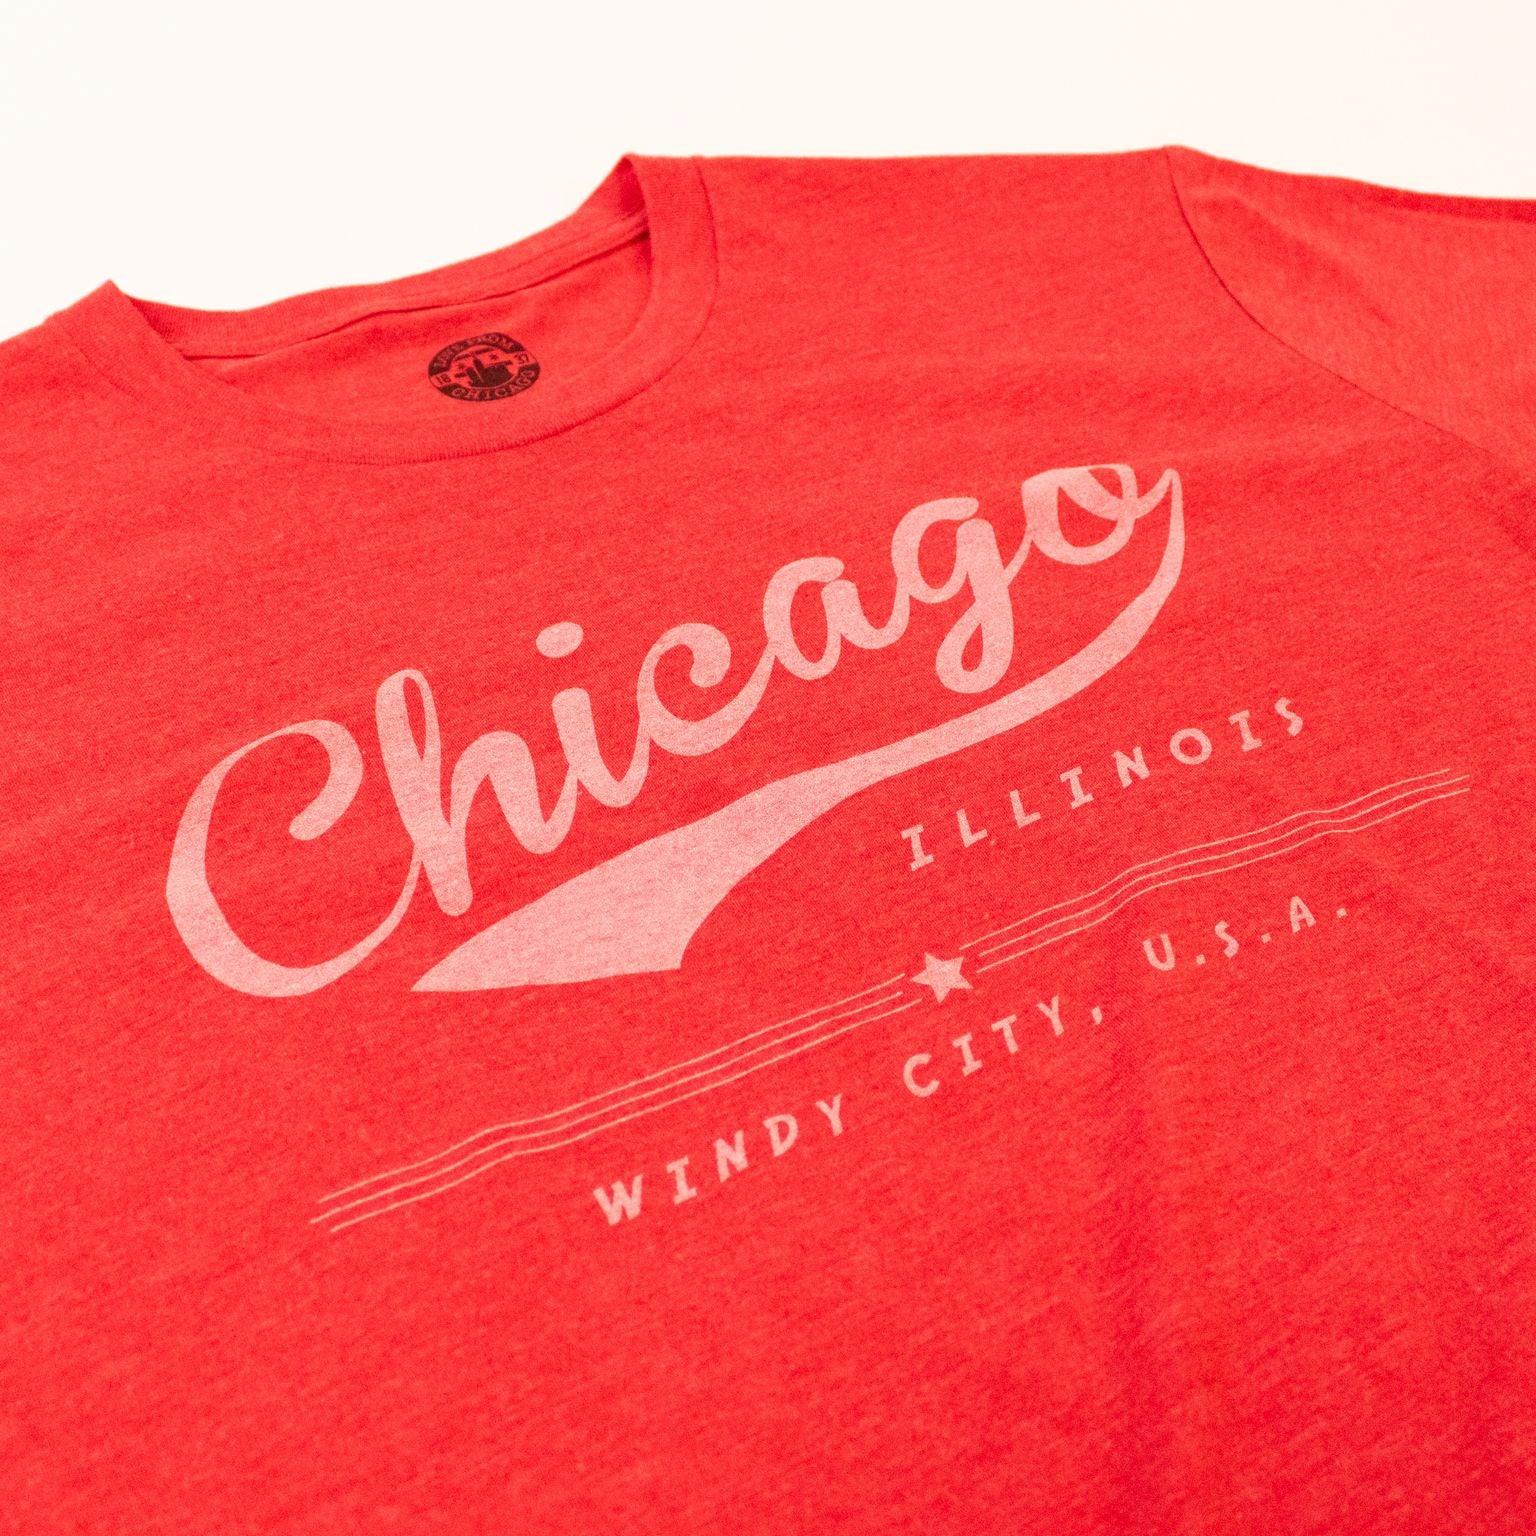 Chicago Vintage Tee - Love From USA